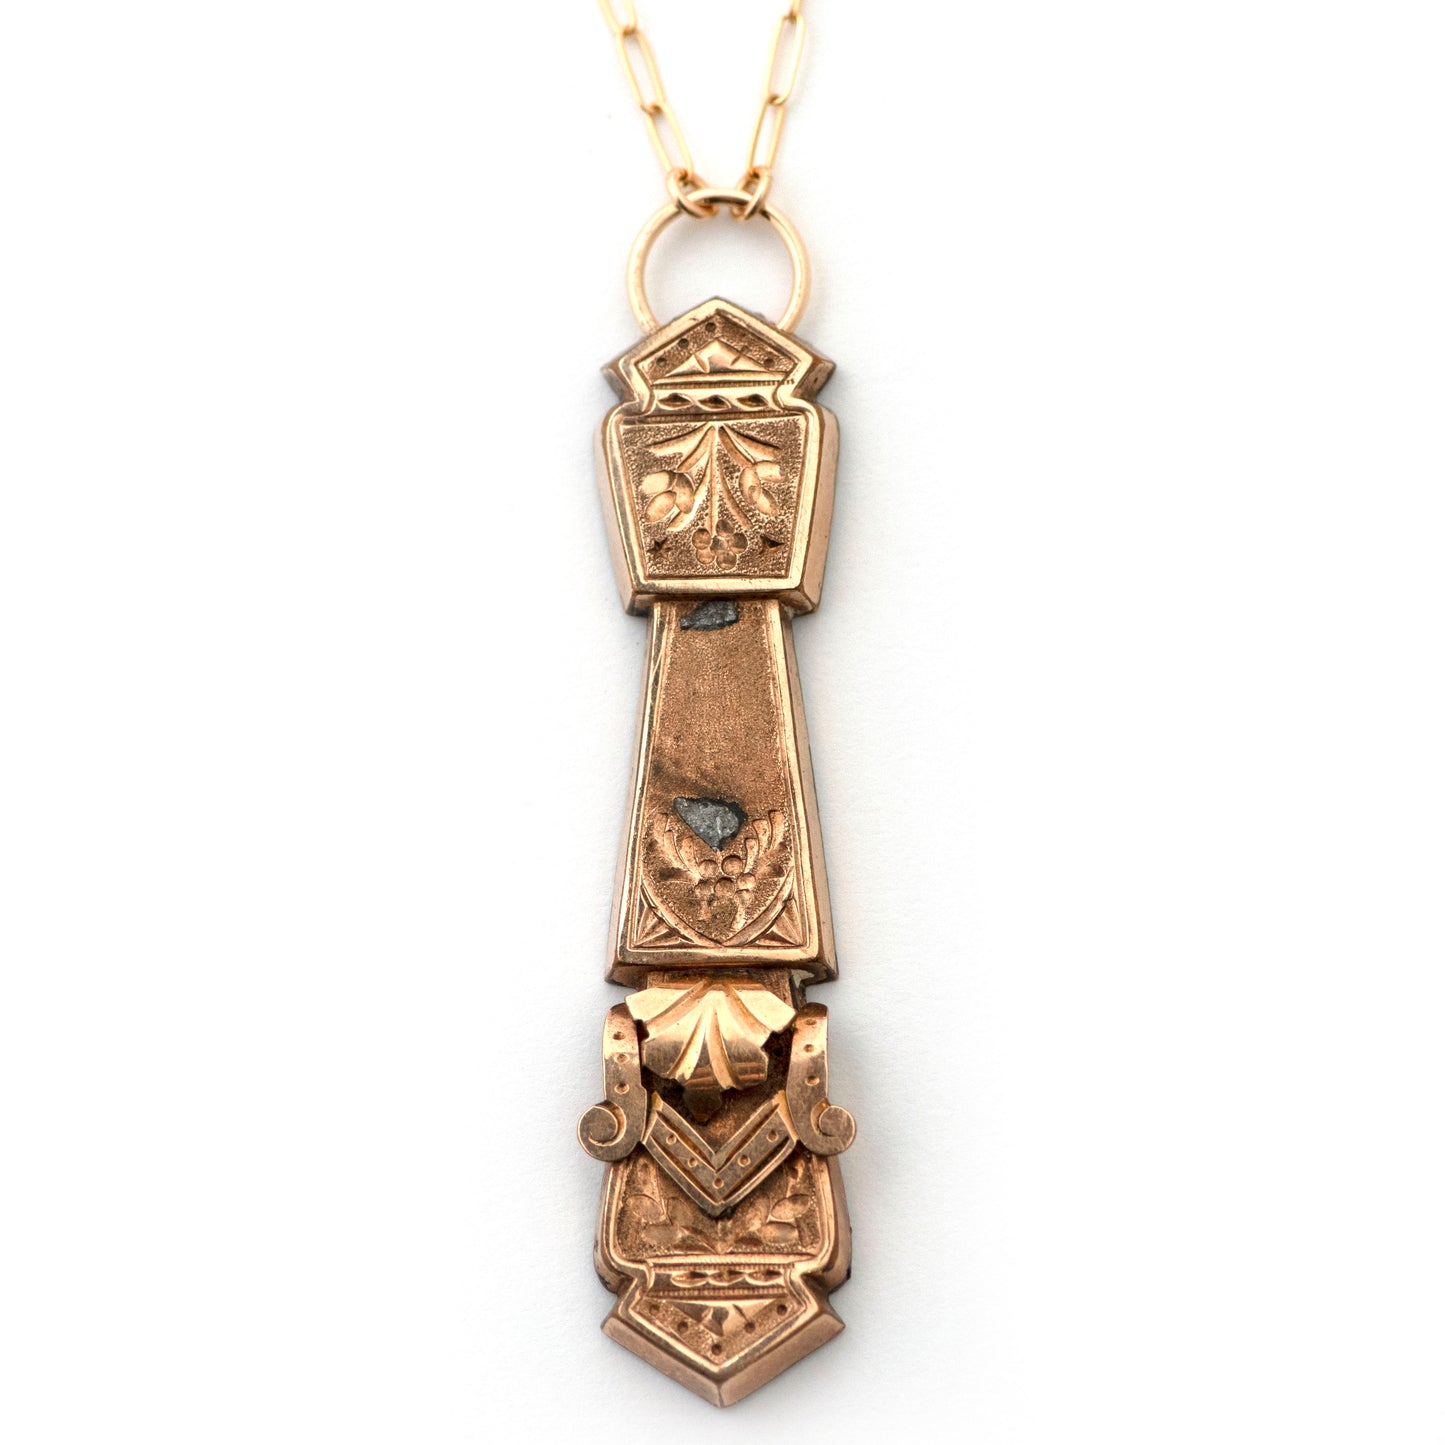 An antique bar pin conversion to vertical pendant shown on an all white background. Pendant resembles a thick sword shape or column/pillar shape, has hand engraved details and other 3 dimensional gold filled details.